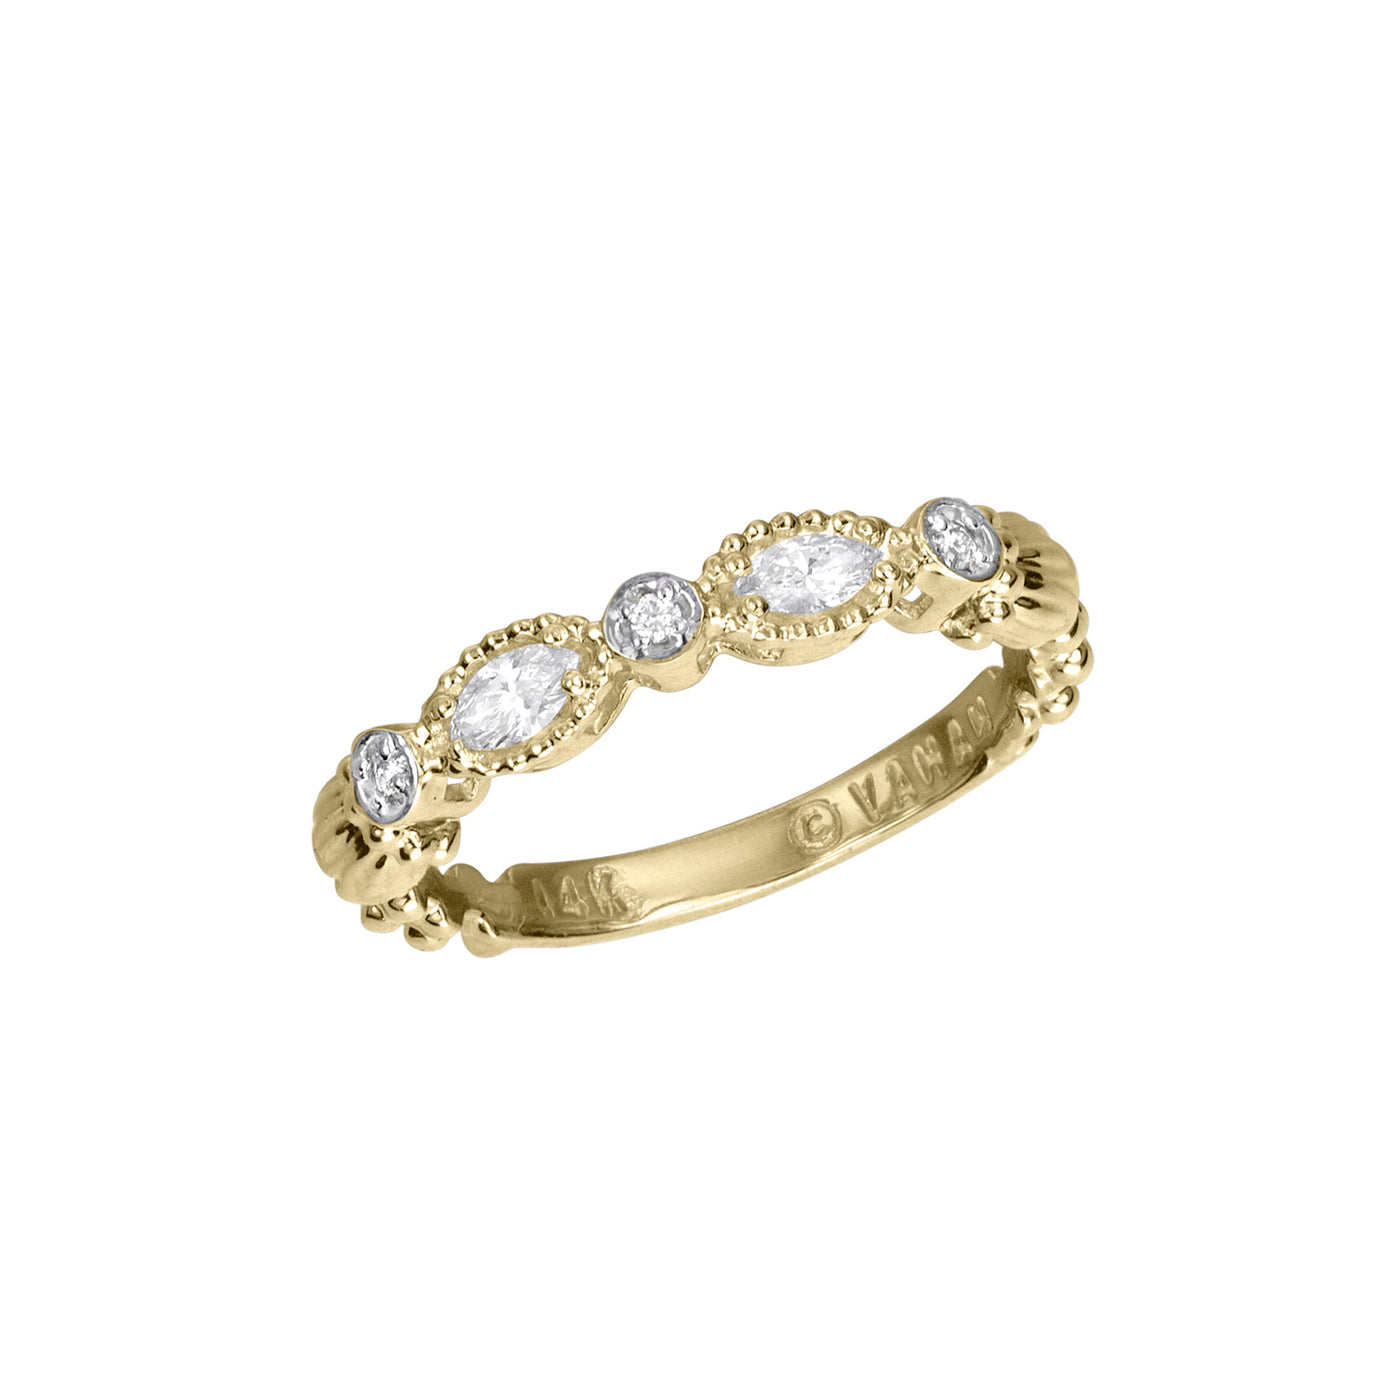 Vahan 14k Yellow Gold with Diamonds Stackable Moiré Beaded Fashion Ring – 12952GD